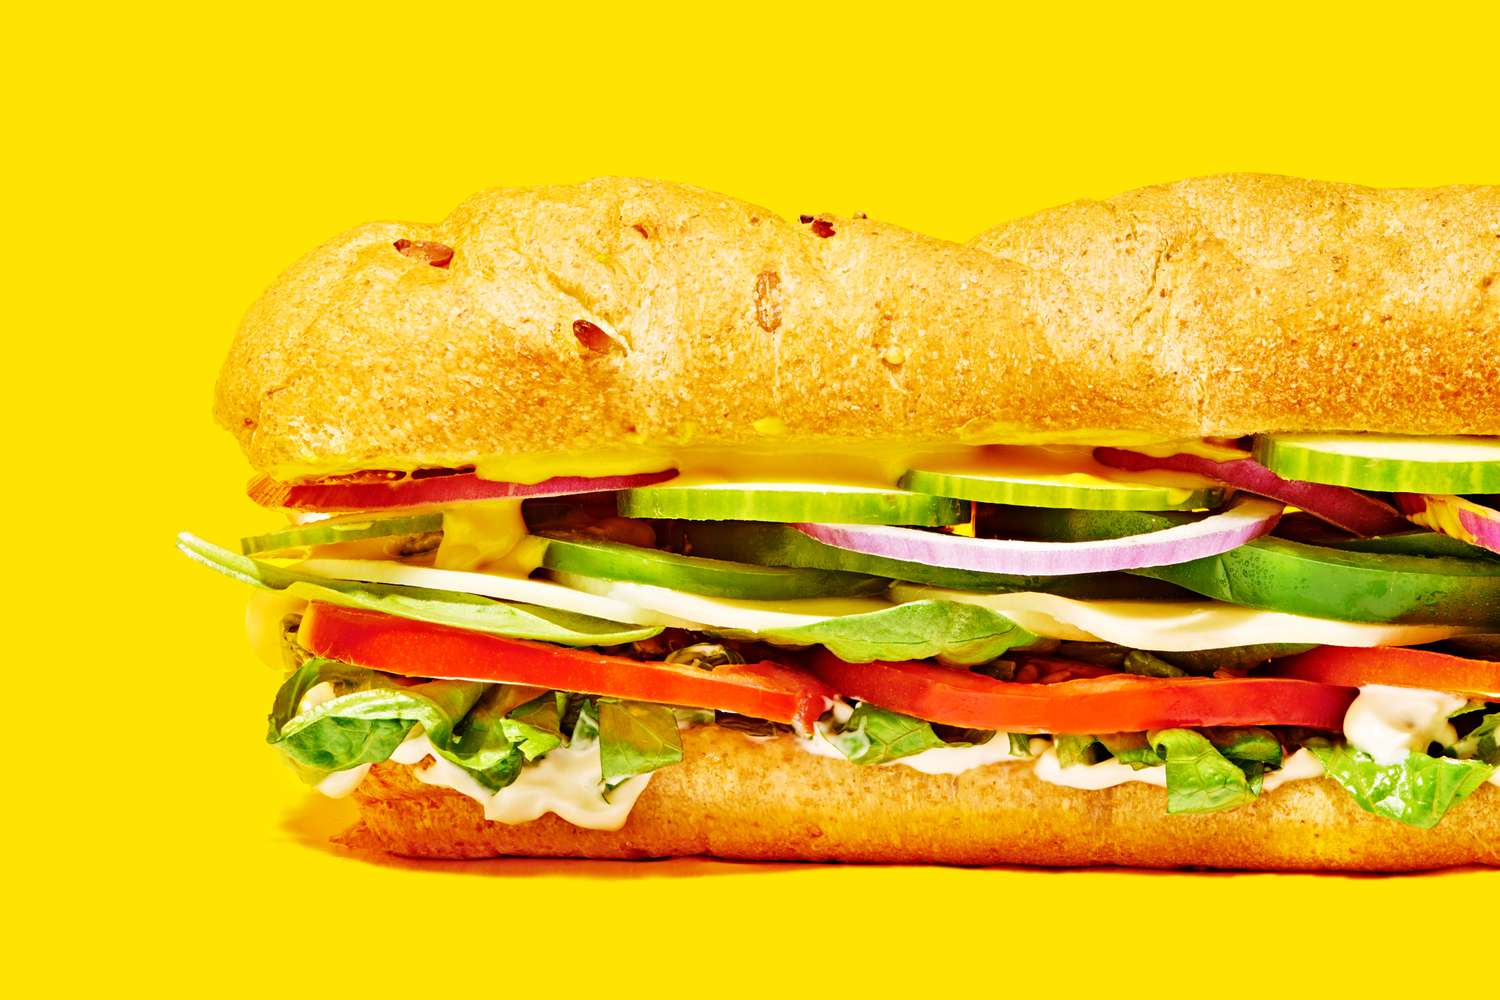 A sub sandwich on a yellow surface and background